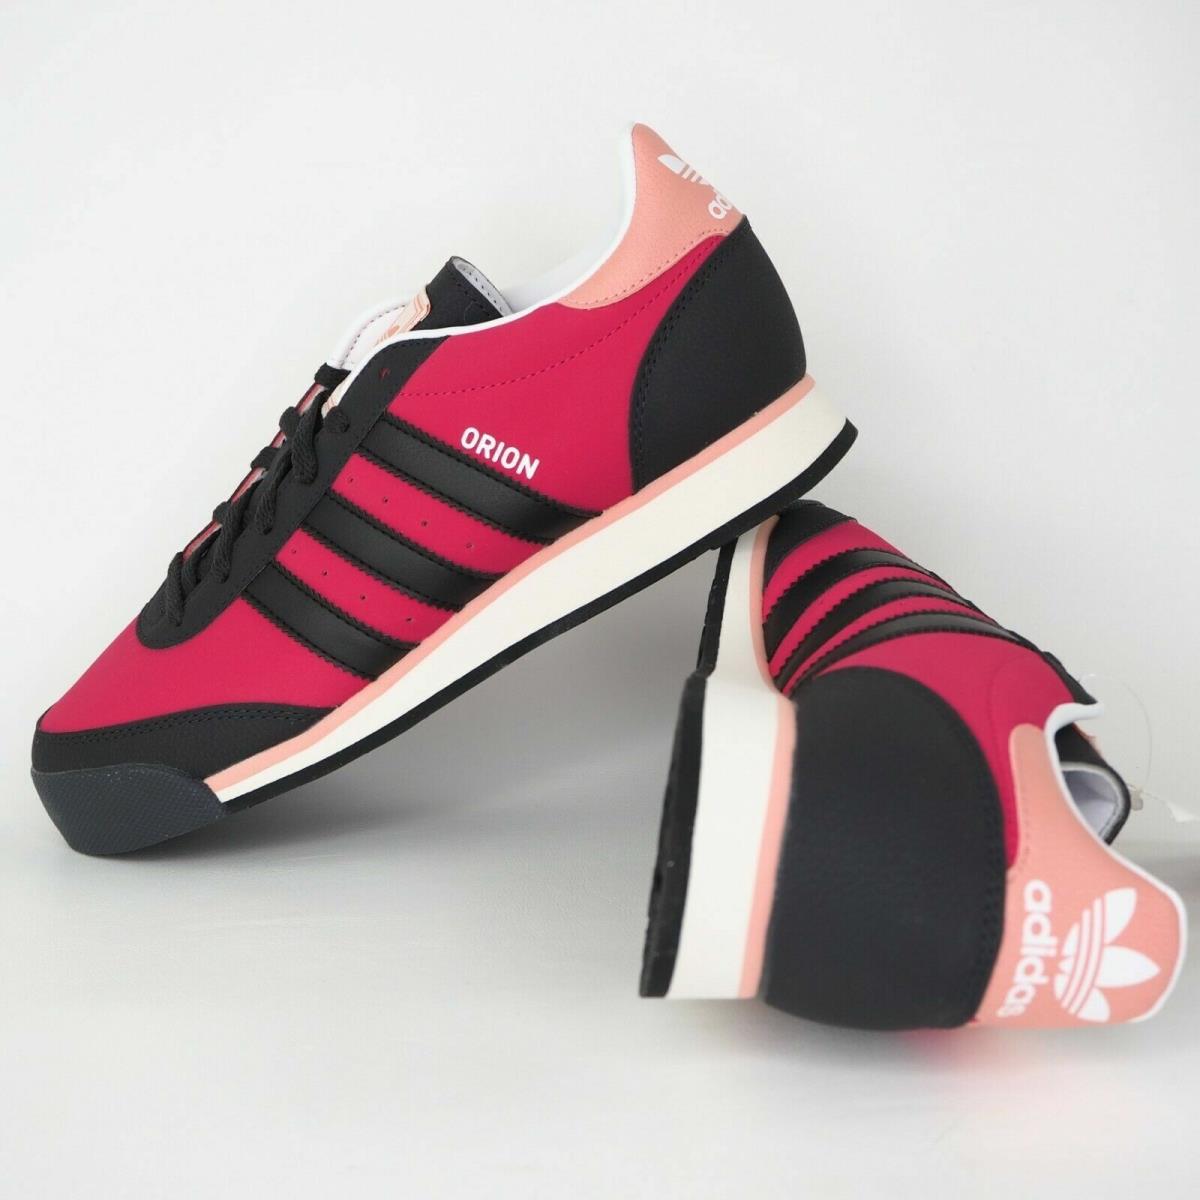 Adidas shoes Orion - Pink 6